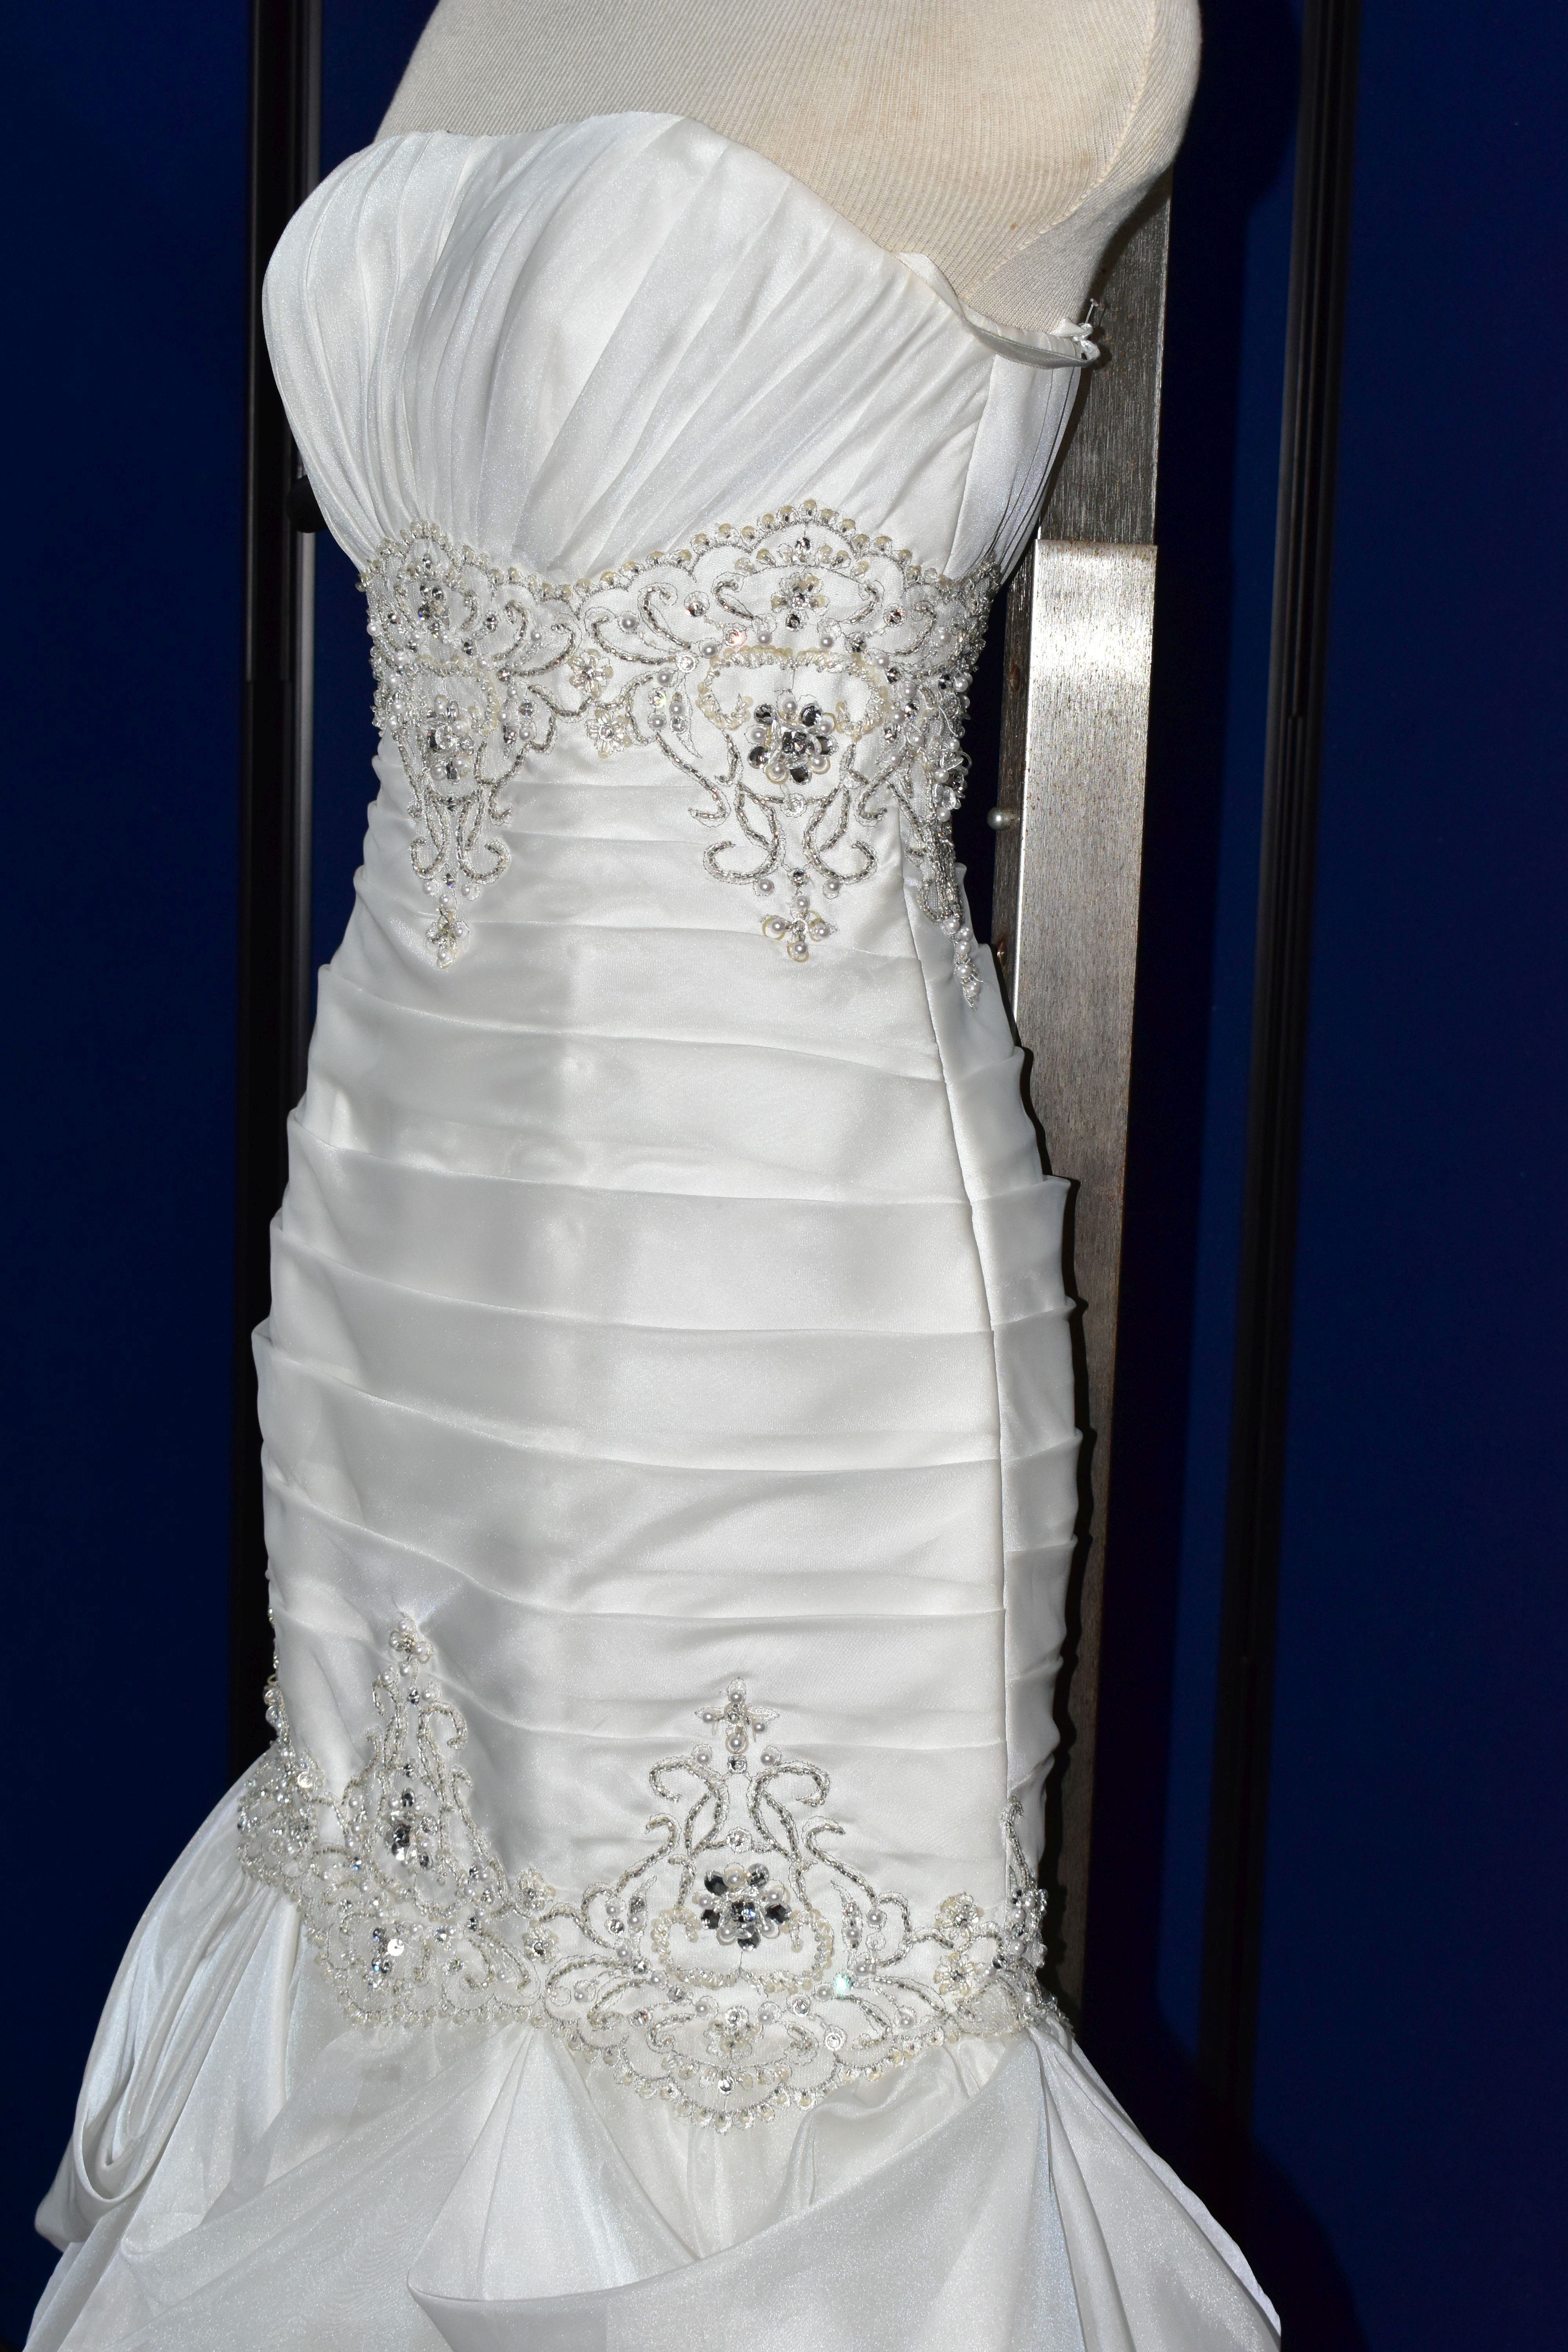 WEDDING GOWN, white strapless gown, pleated bodice pearl and beaded appliques, size 10 (1) - Image 8 of 14